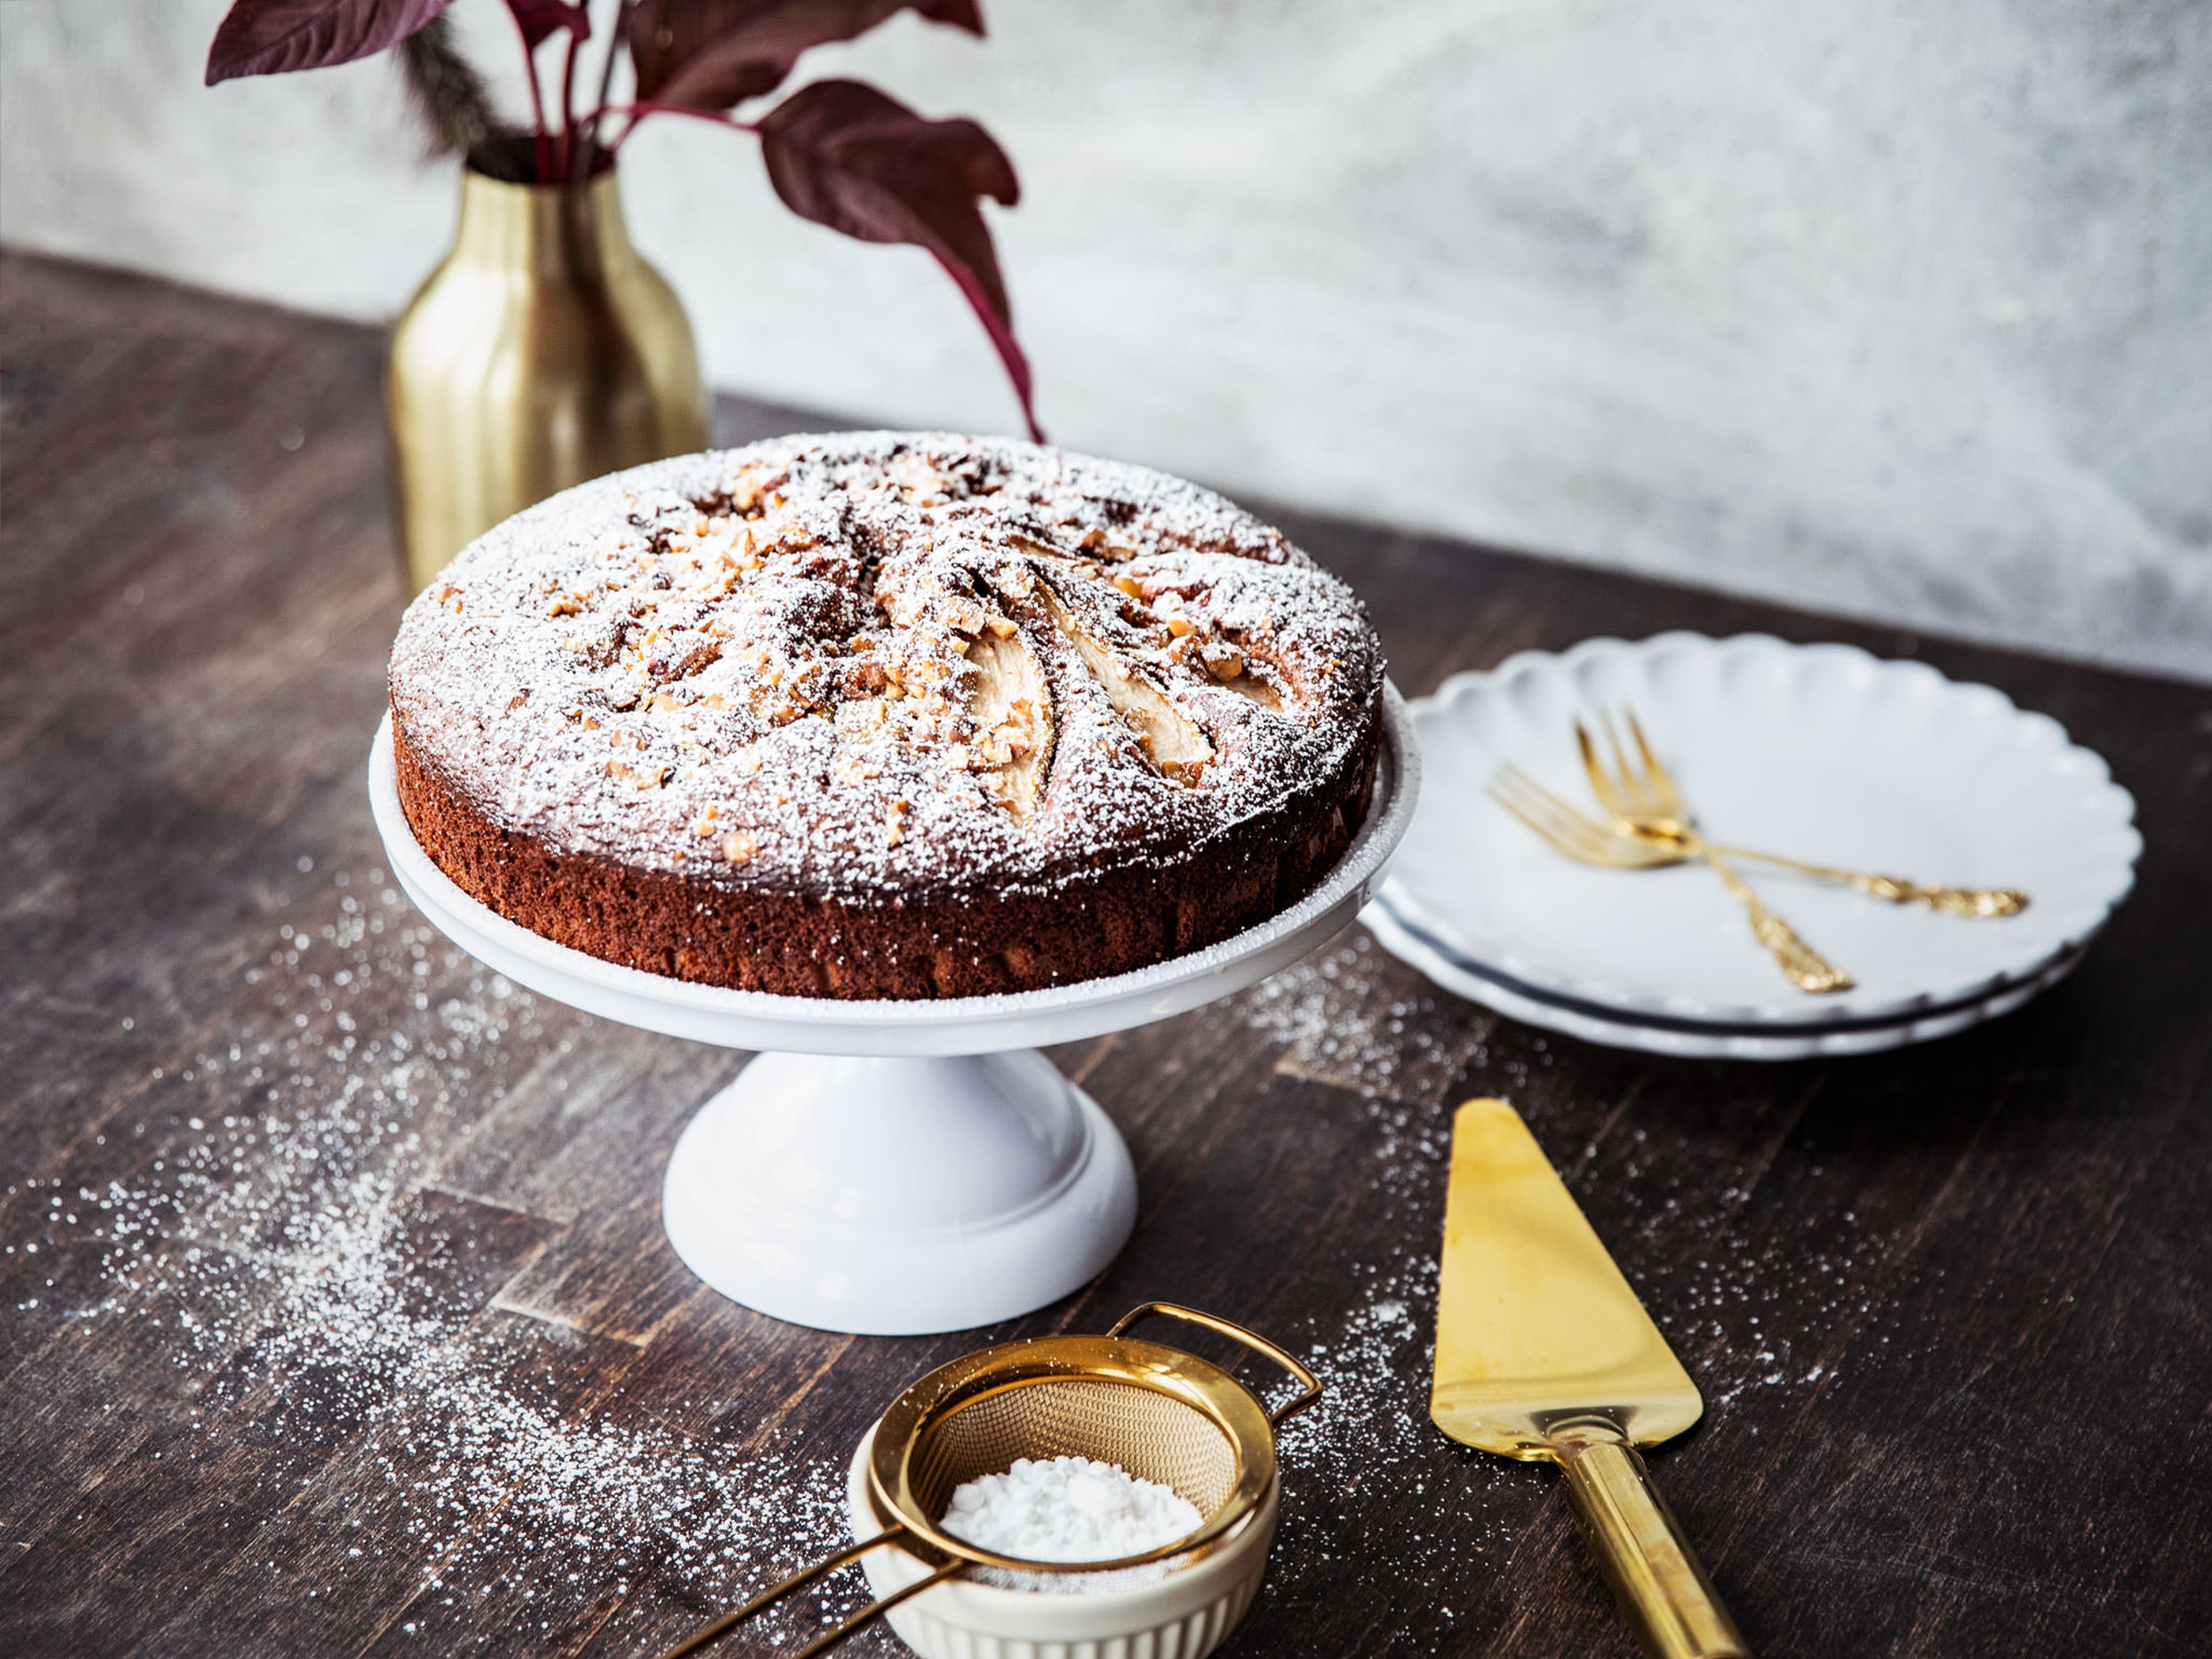 Pear and chocolate olive oil cake